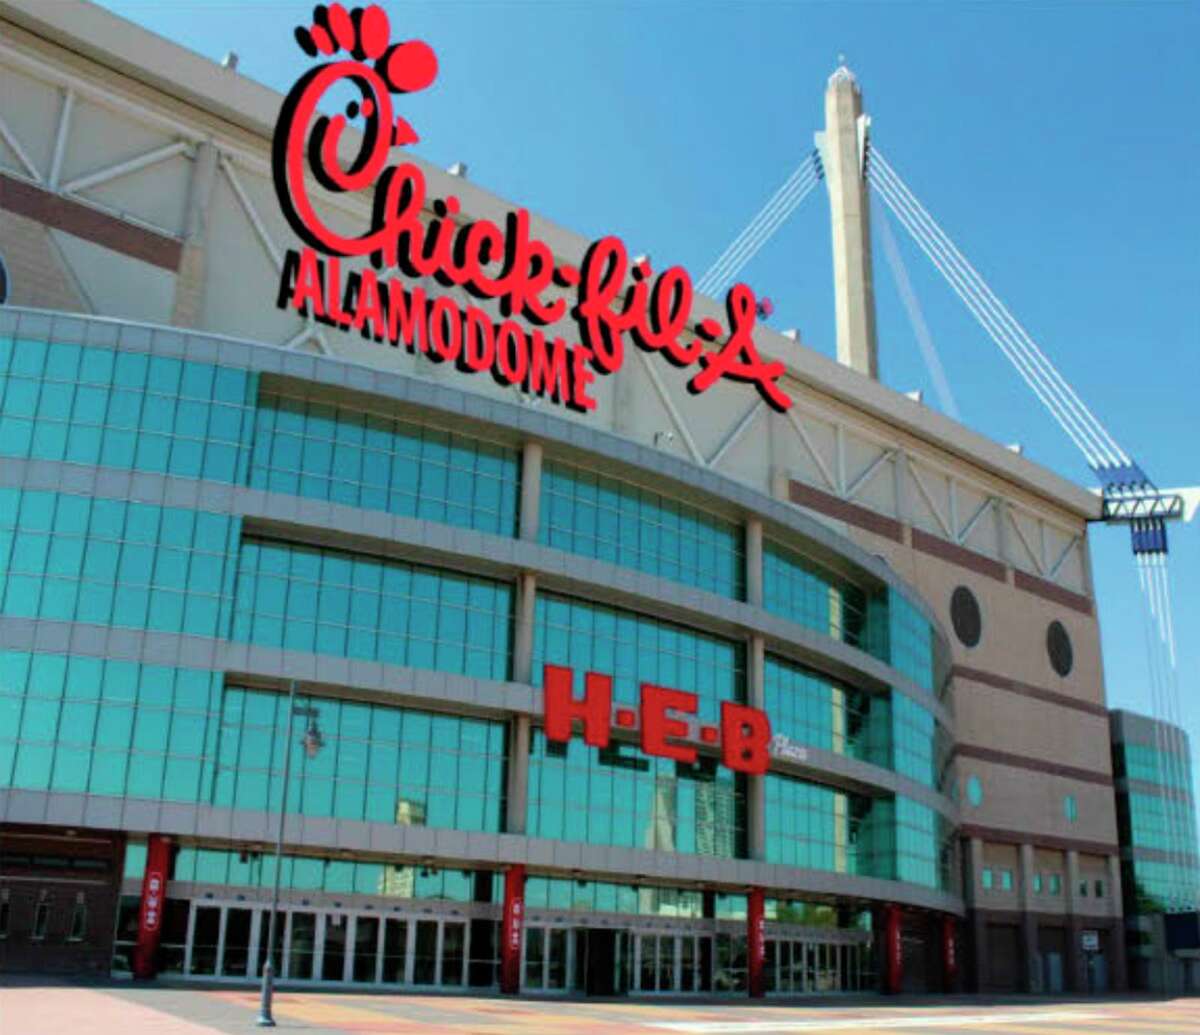 San Antonio officials have considered selling naming rights to the Alamodome. Local Chick-fil-A franchisees expressed interest in the idea in 2018. This City Council photo rendering shows what a re-branded Alamodome would look like. The concept never came to fruition.